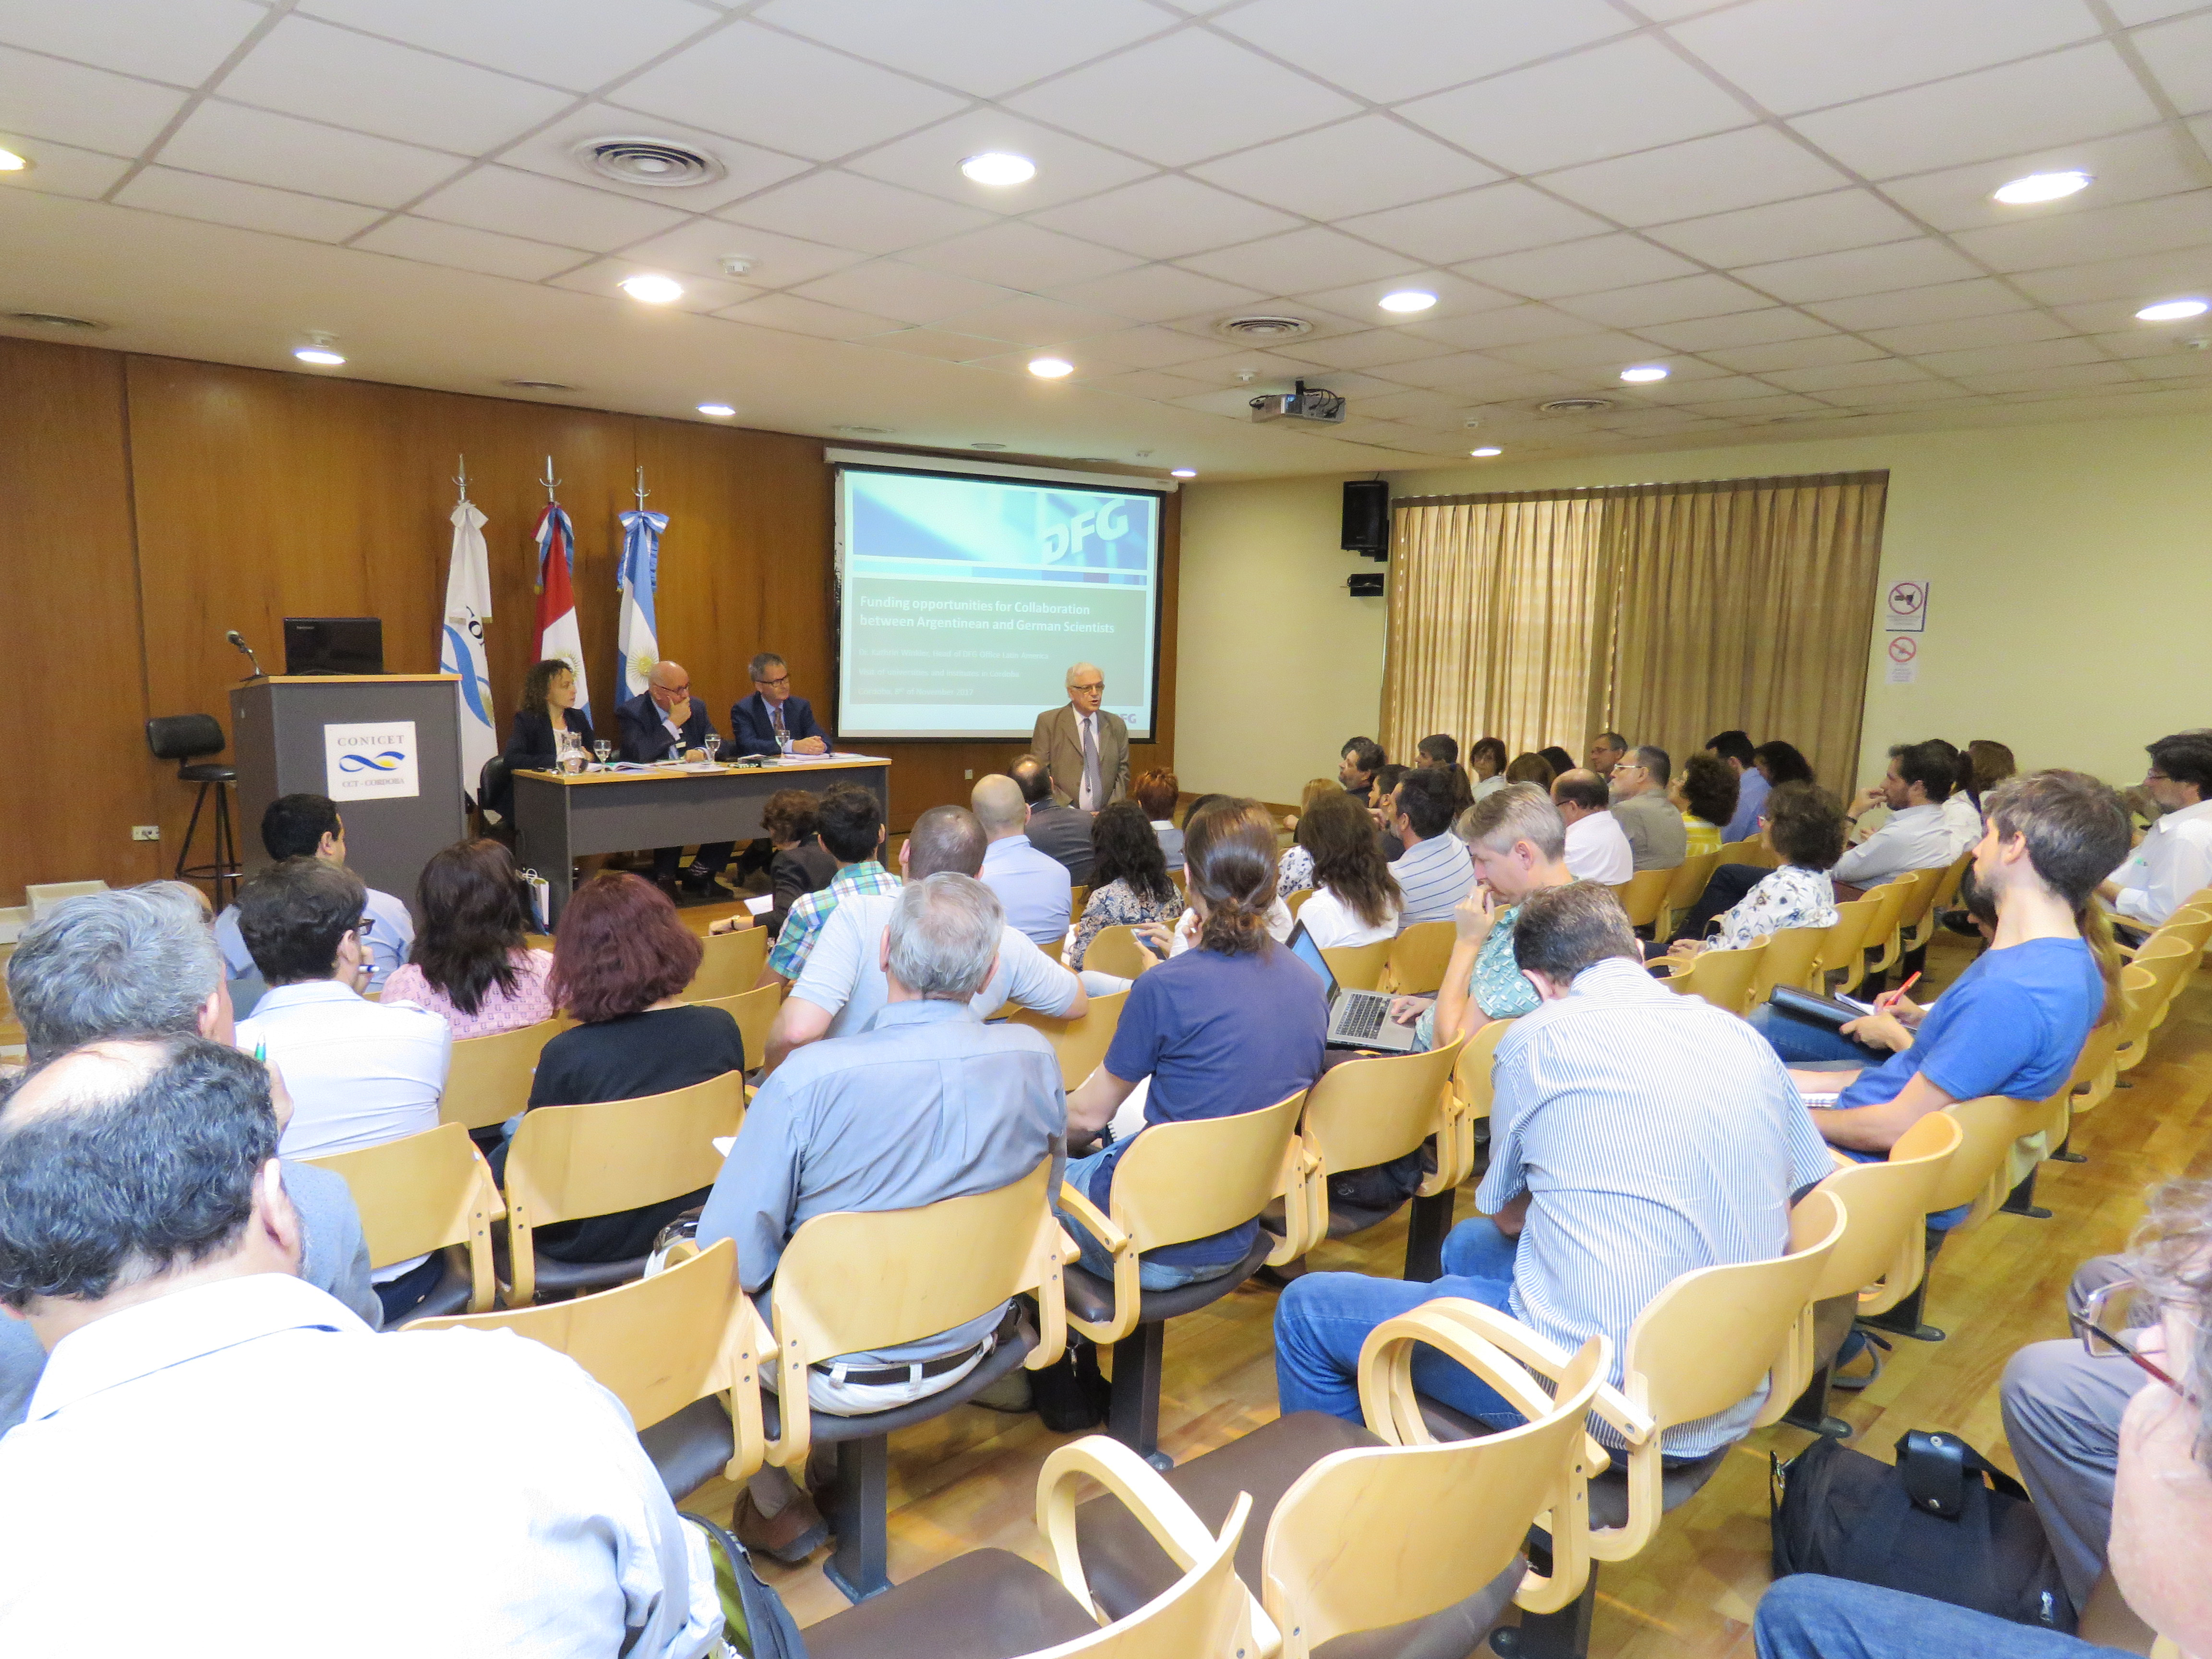 Prof Dr Pedro Depetris welcomes participants at the information event held by CONICET at the National University of Córdoba